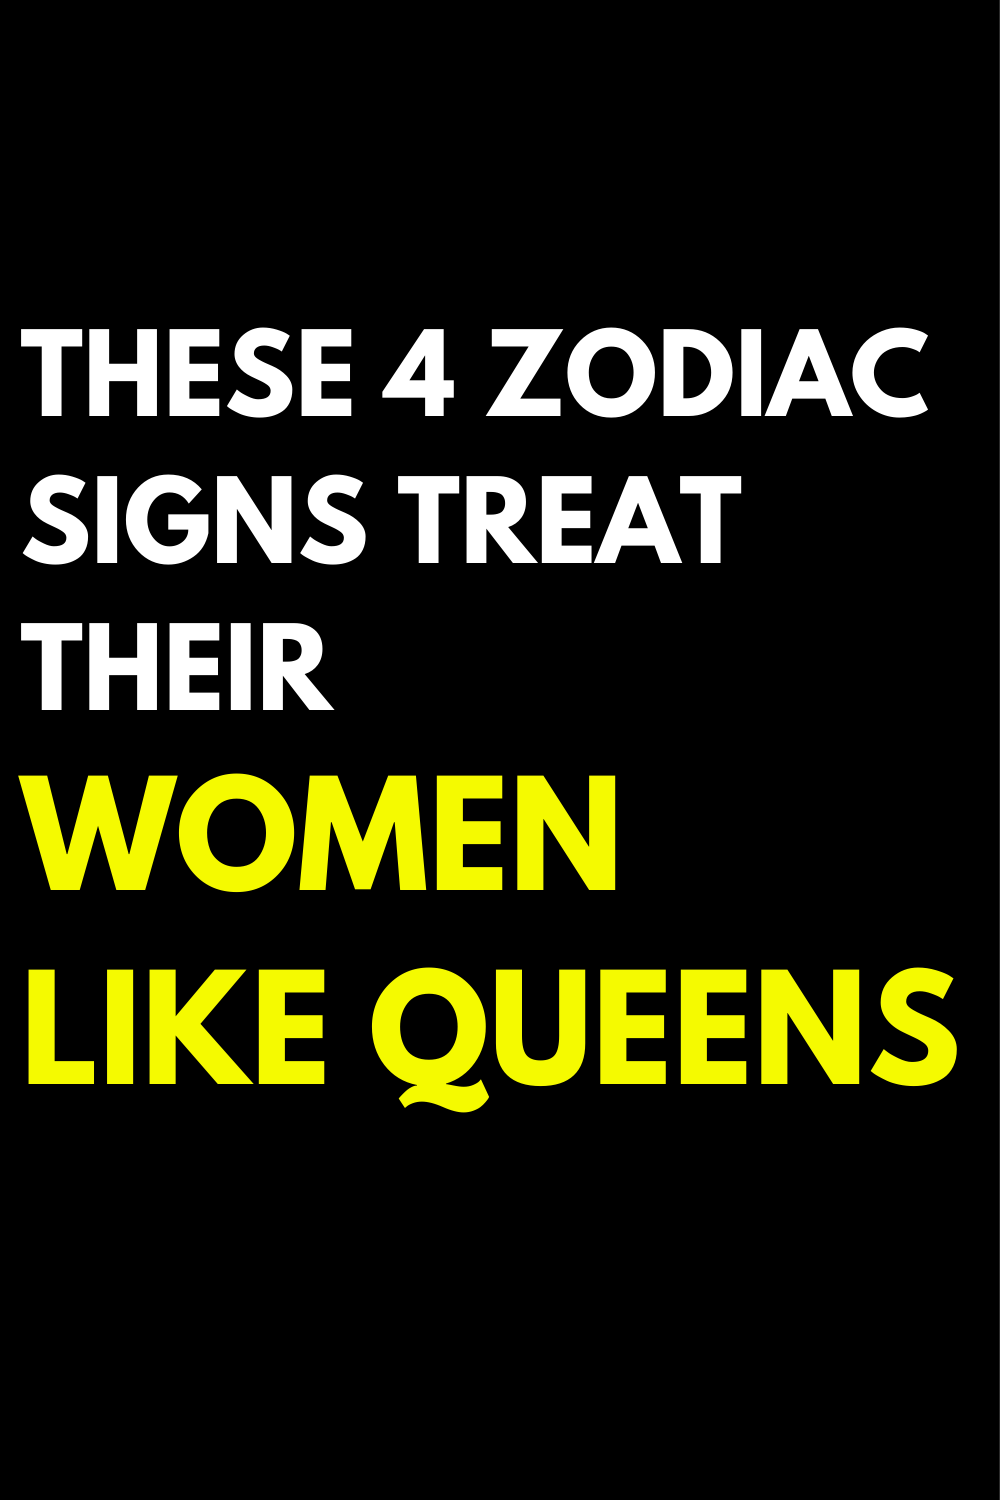 These 4 Zodiac Signs Treat Their Women Like Queens